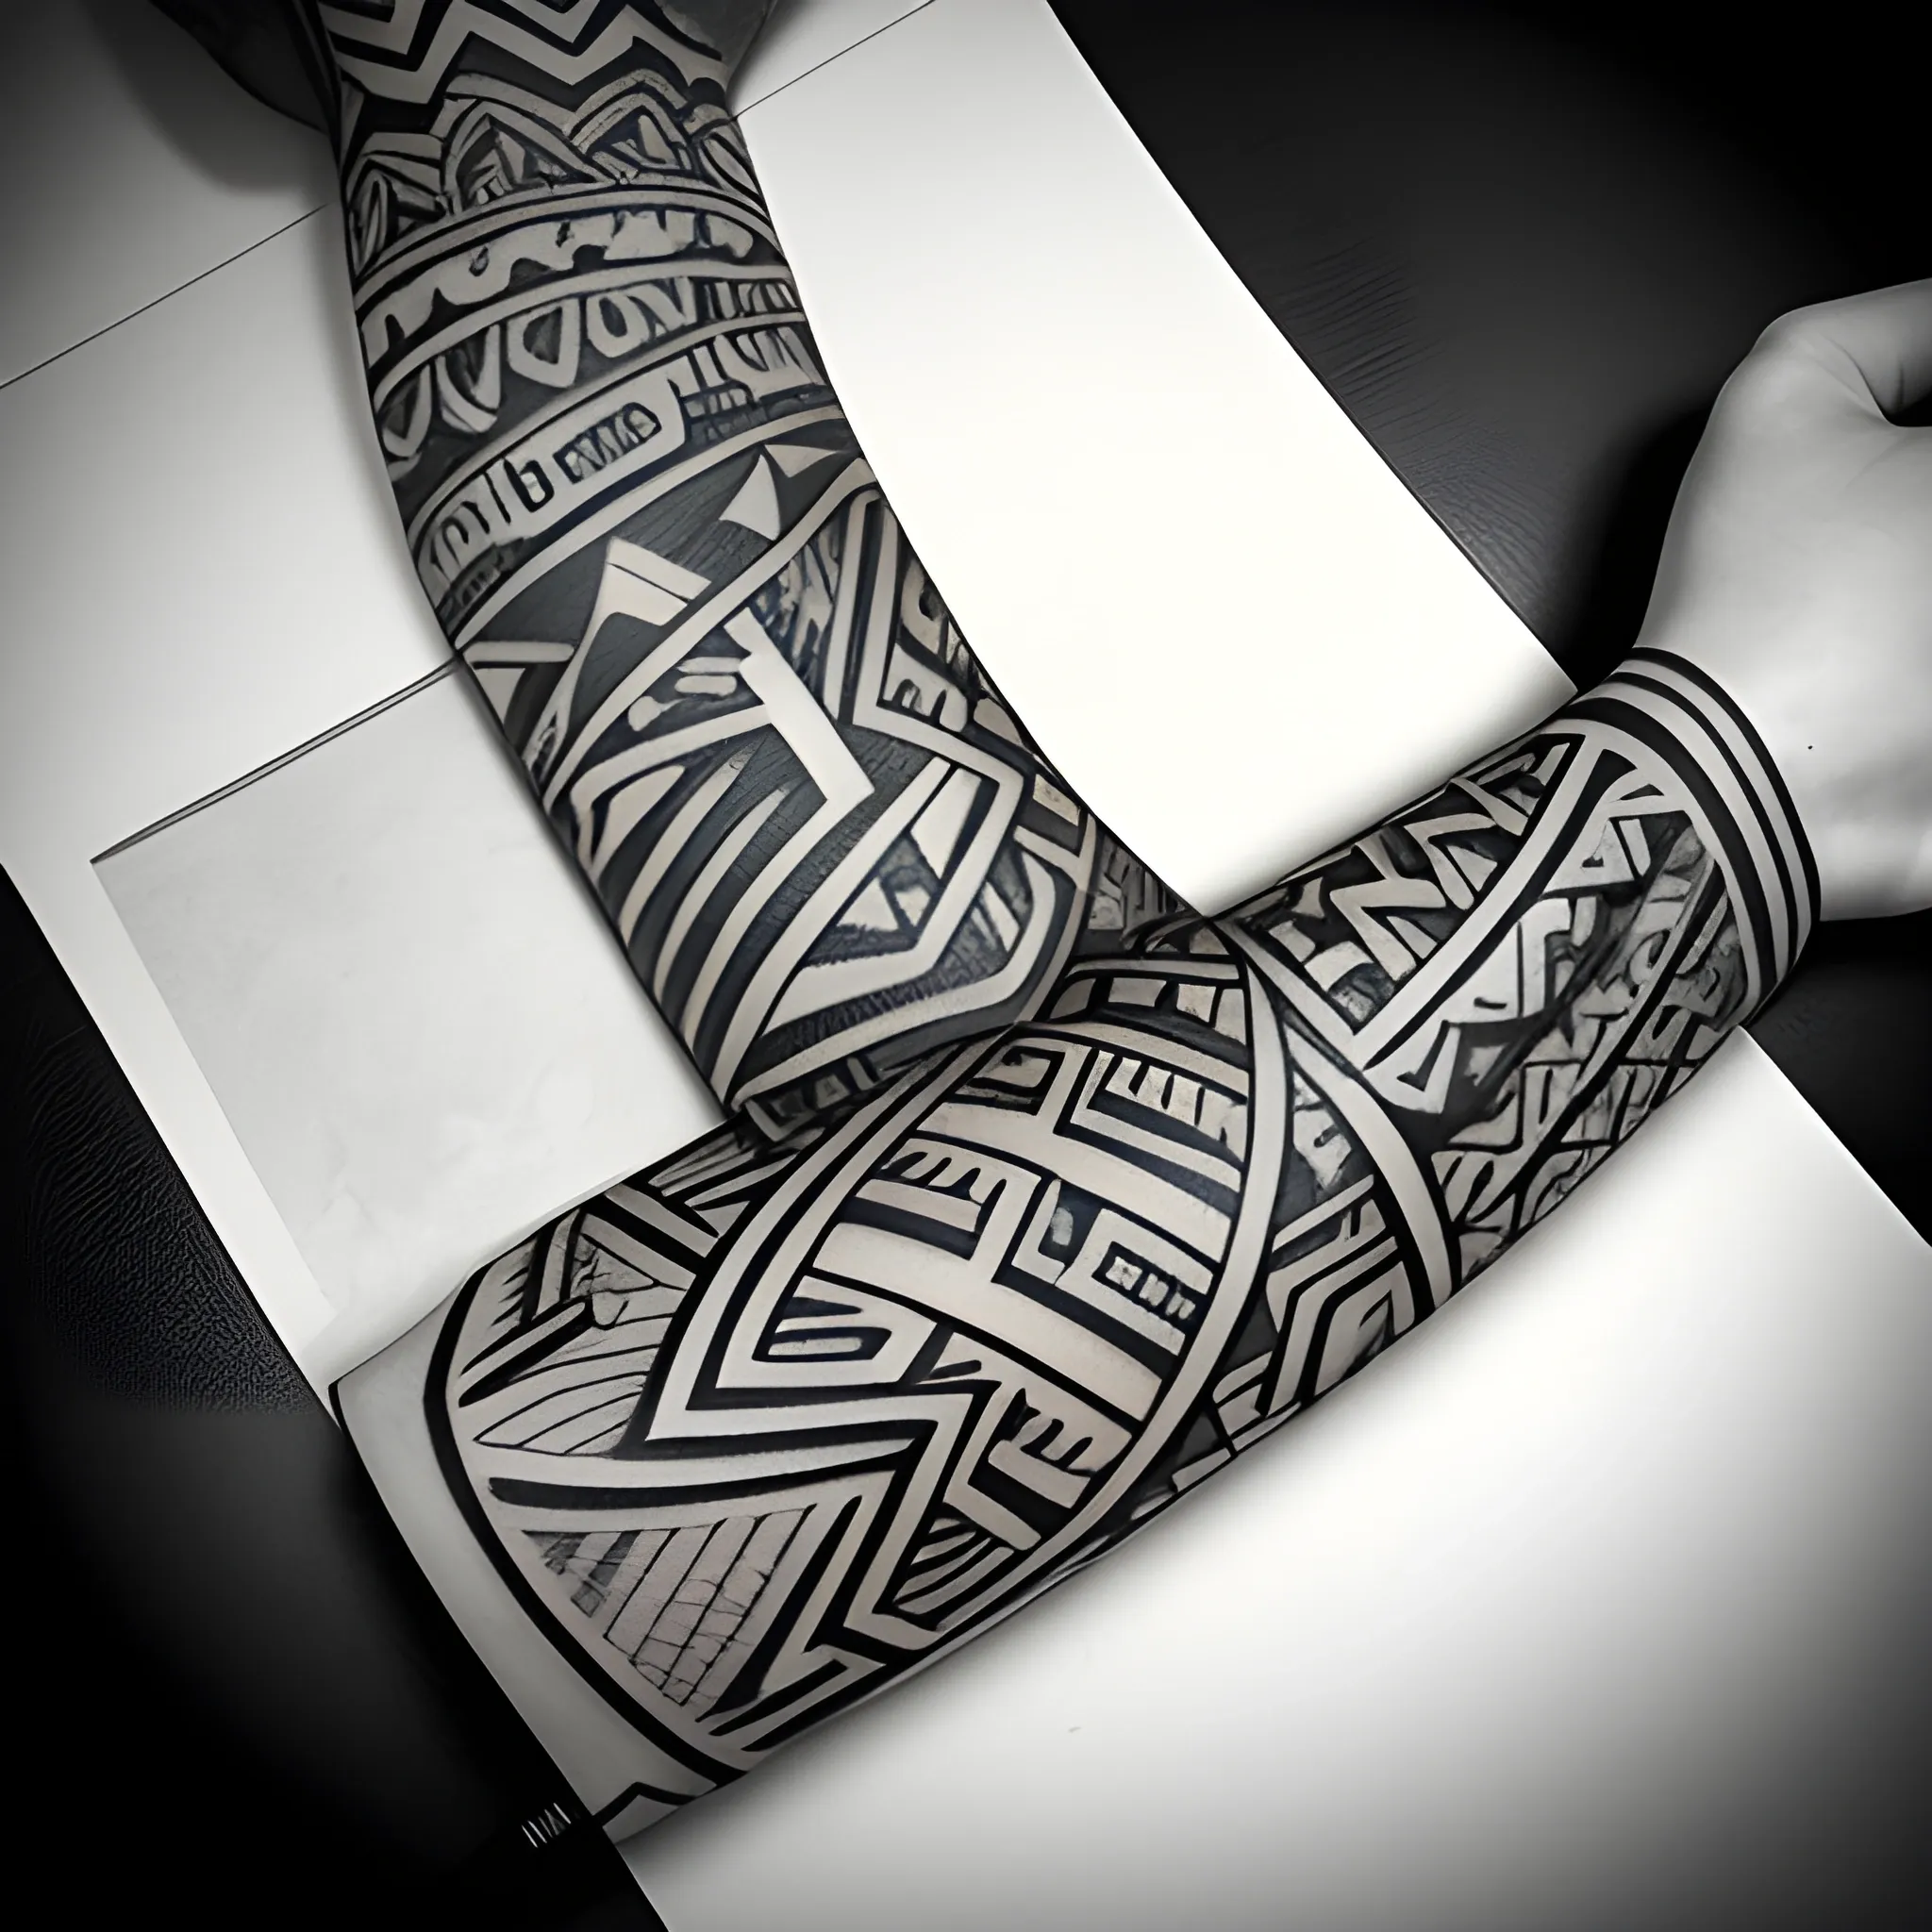 Sketch Tattoos Look Like They've Been Drawn On With A Pencil | DeMilked